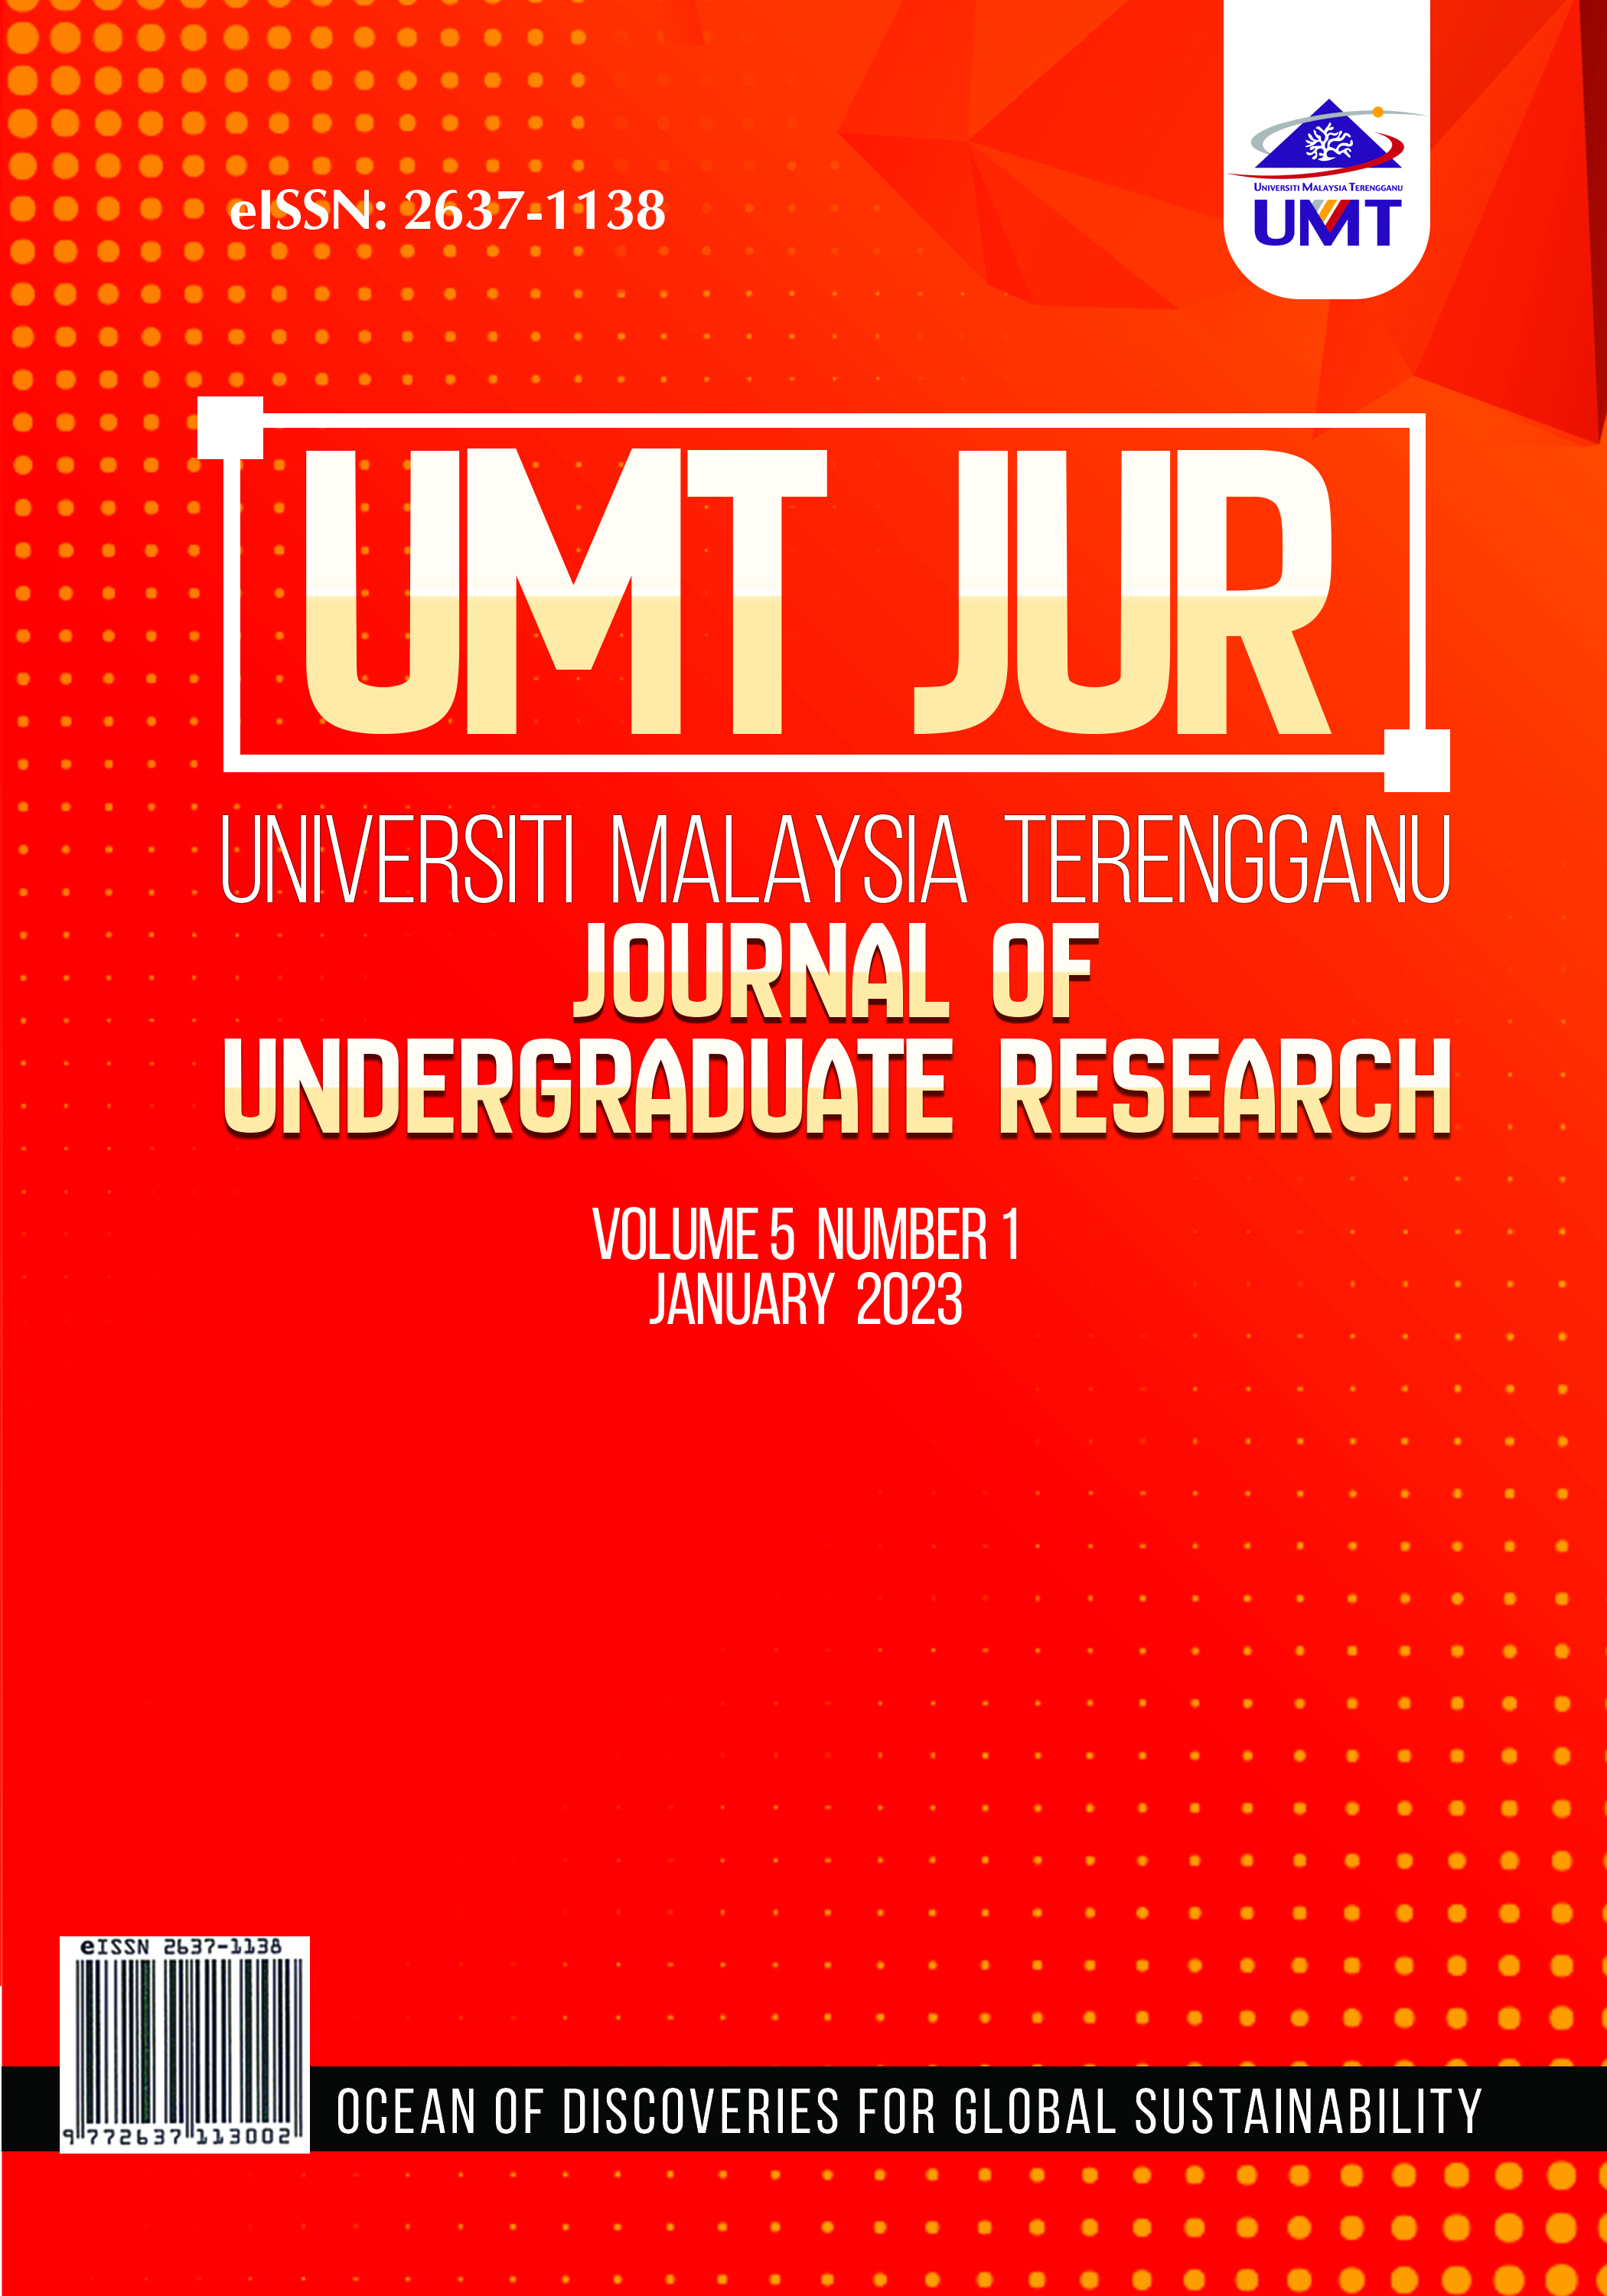 					View Vol. 5 No. 1 (2023): UMT Journal of Undergraduate Research, January 2023 
				